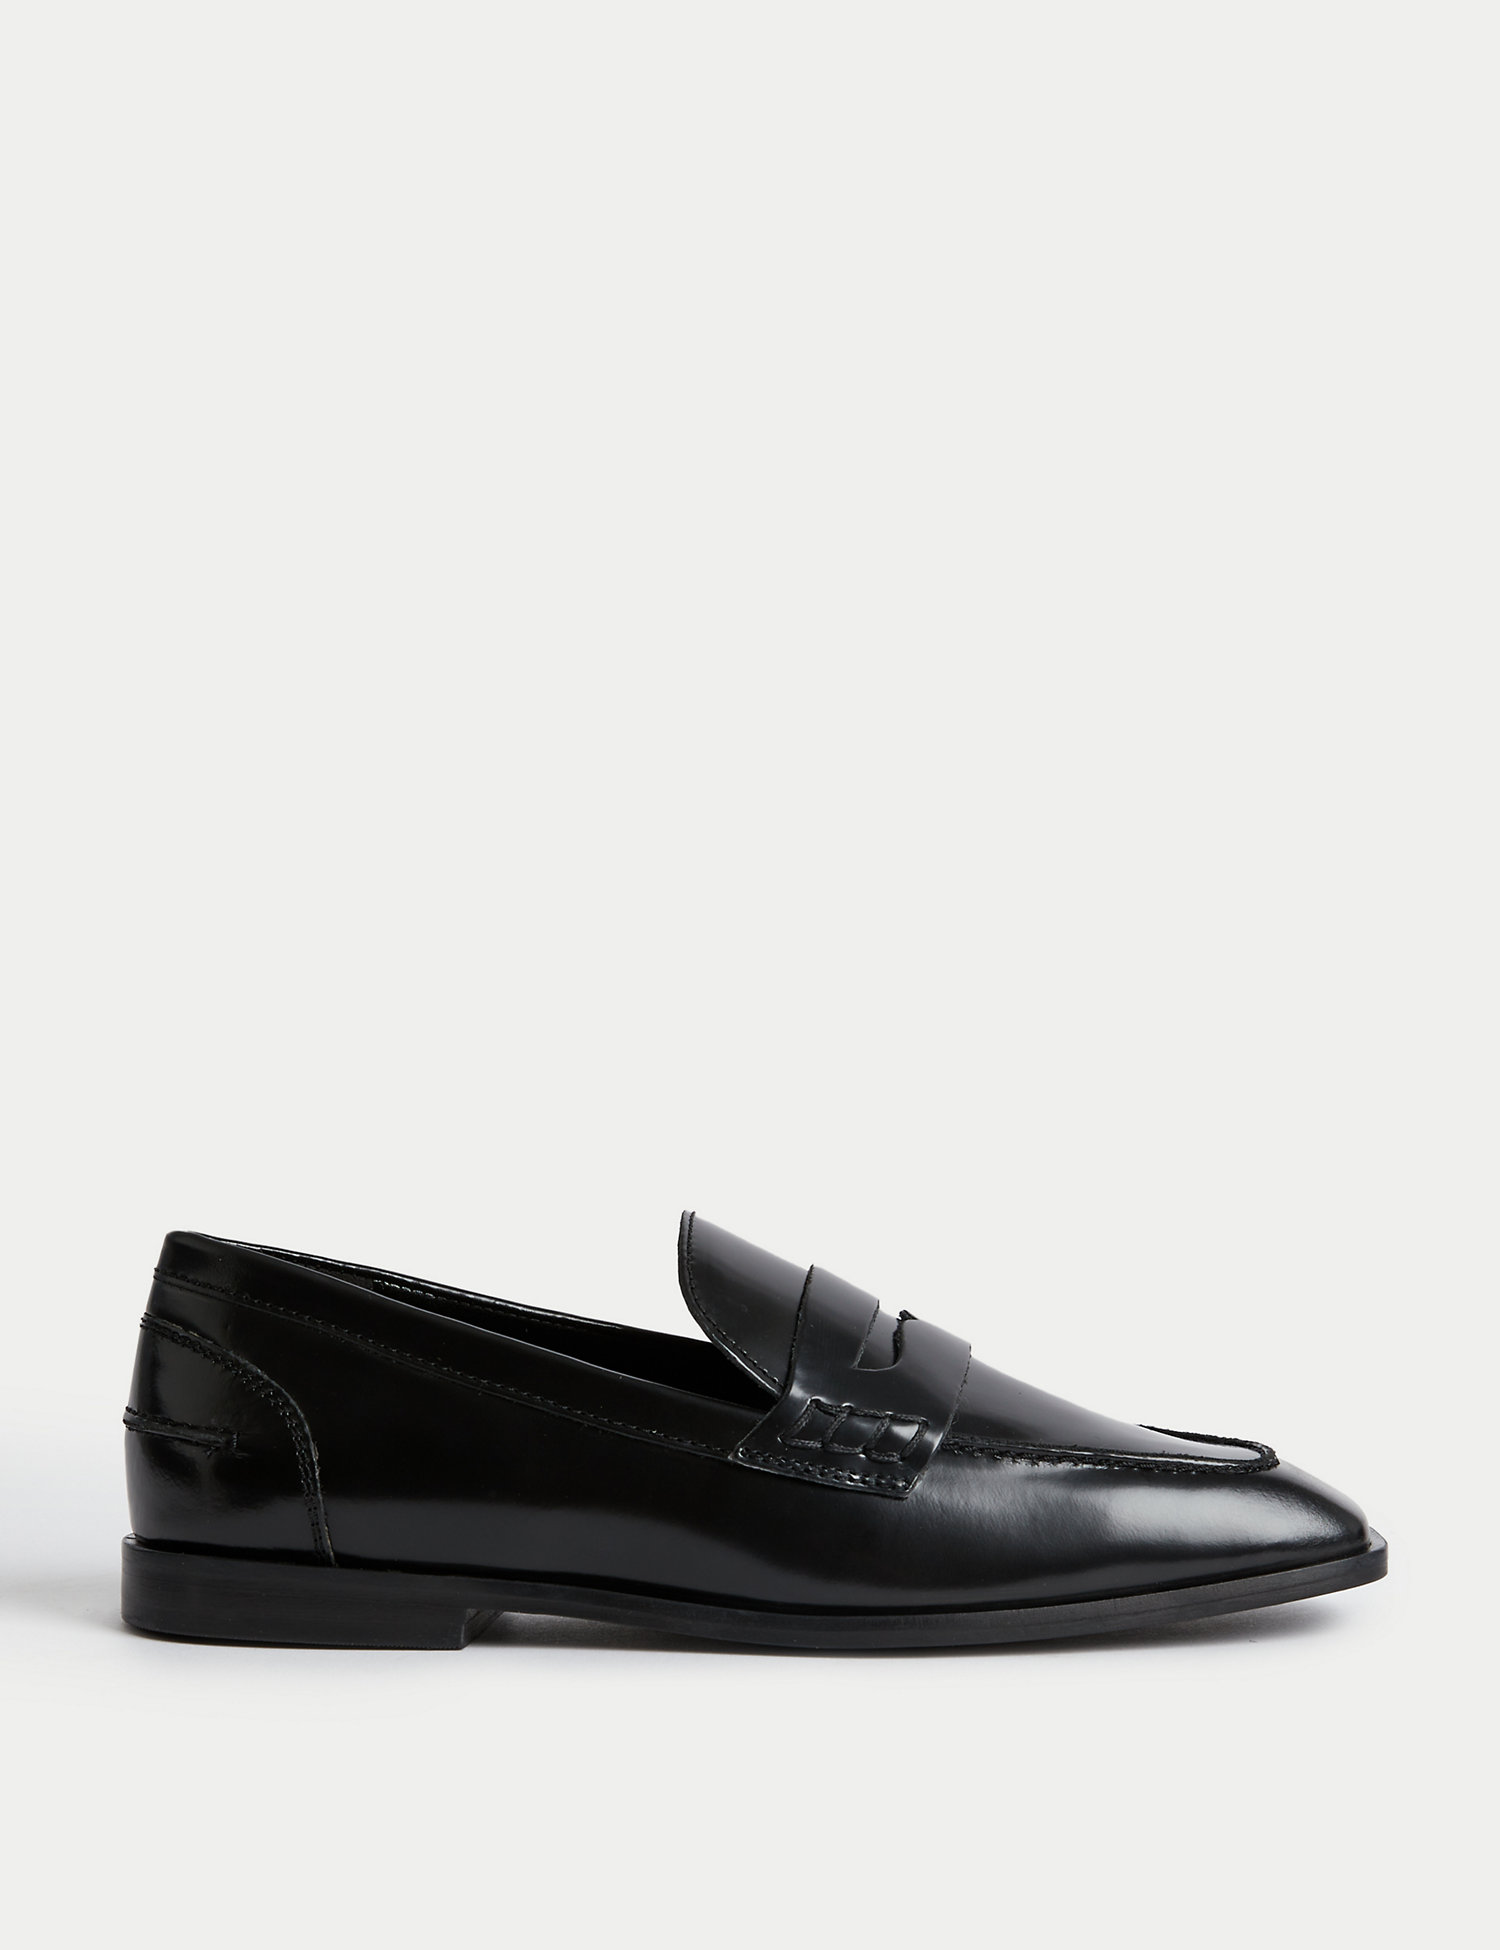 Autograpgh + Leather Flat Square Toe Loafers